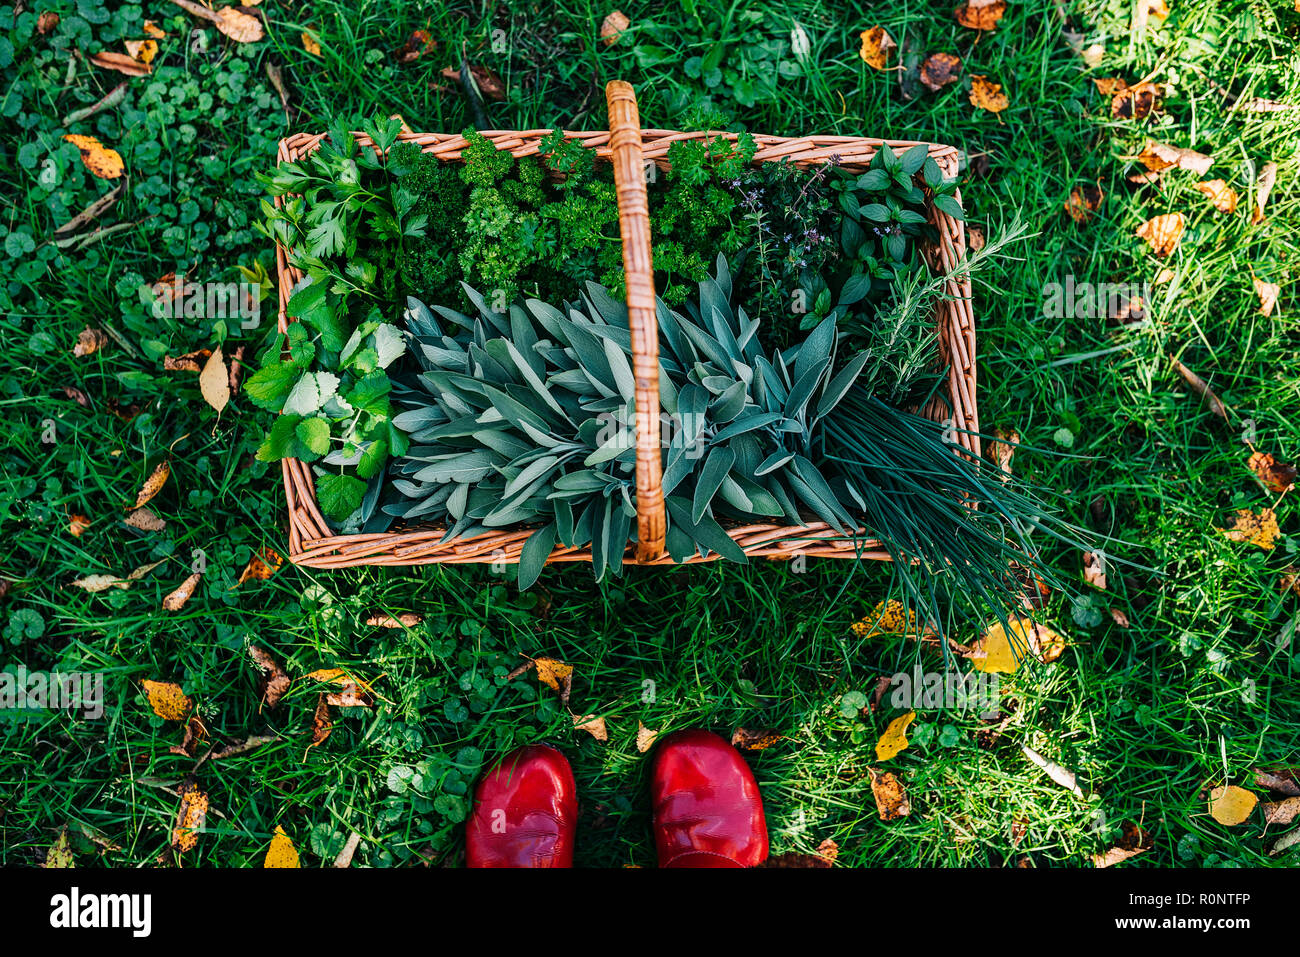 Woman's feet next to a basket filled with freshly picked herbs Stock Photo